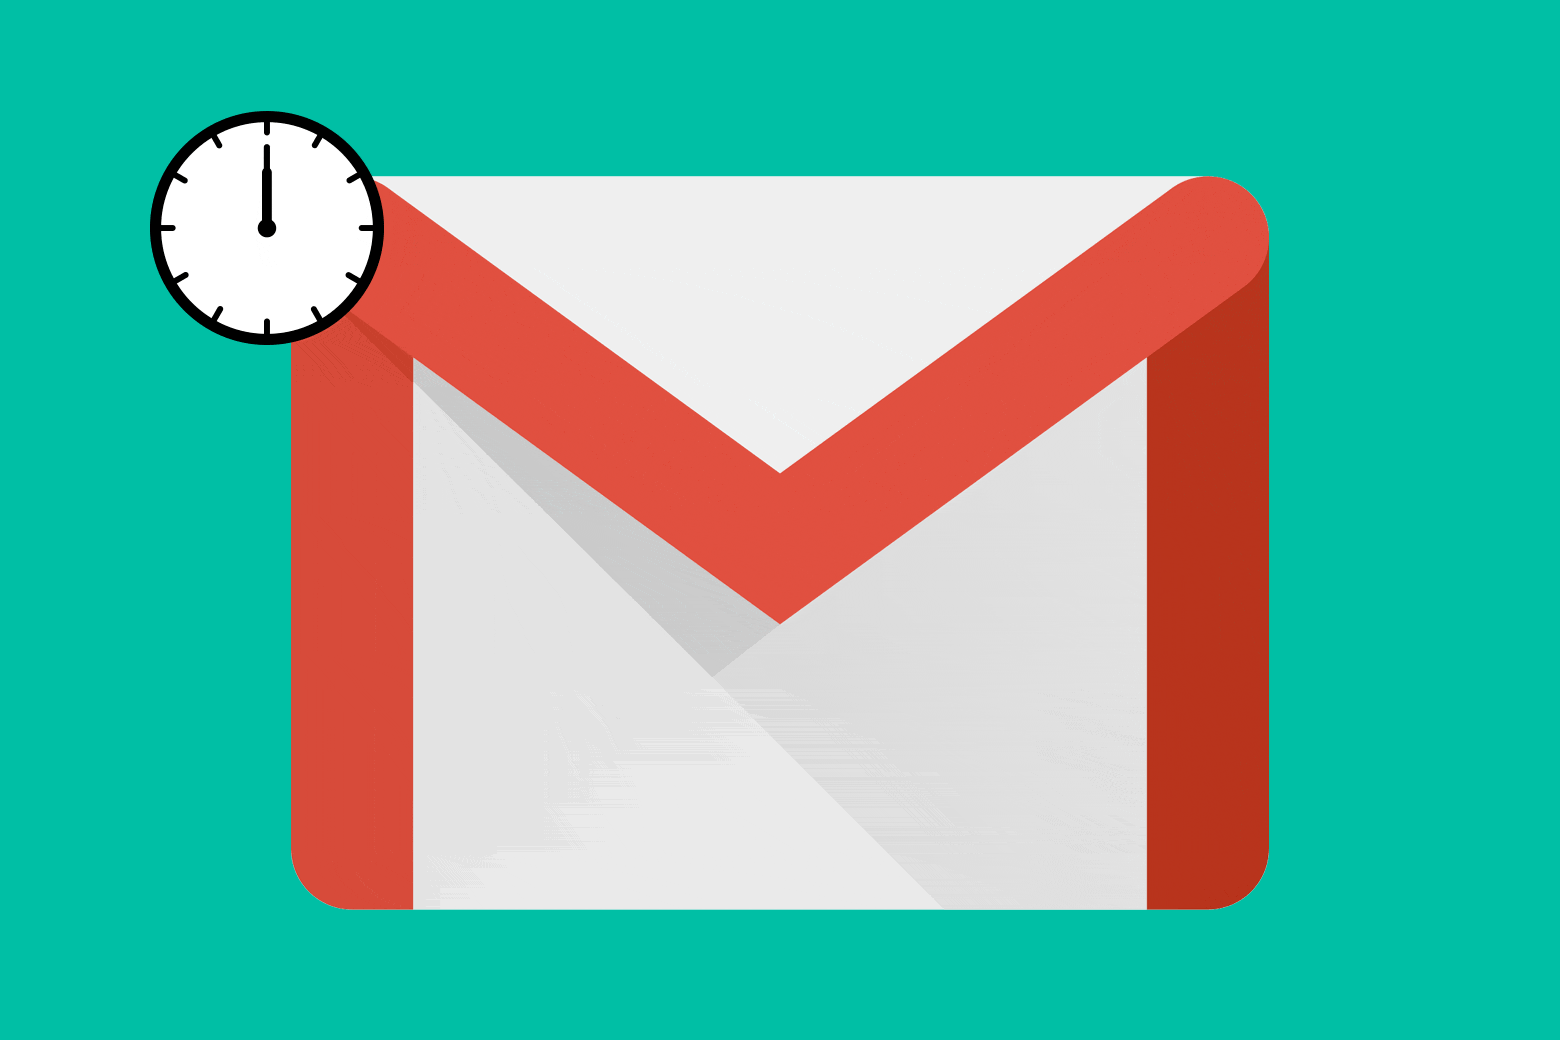 The Gmail envelope logo and an animation of a ticking clock.